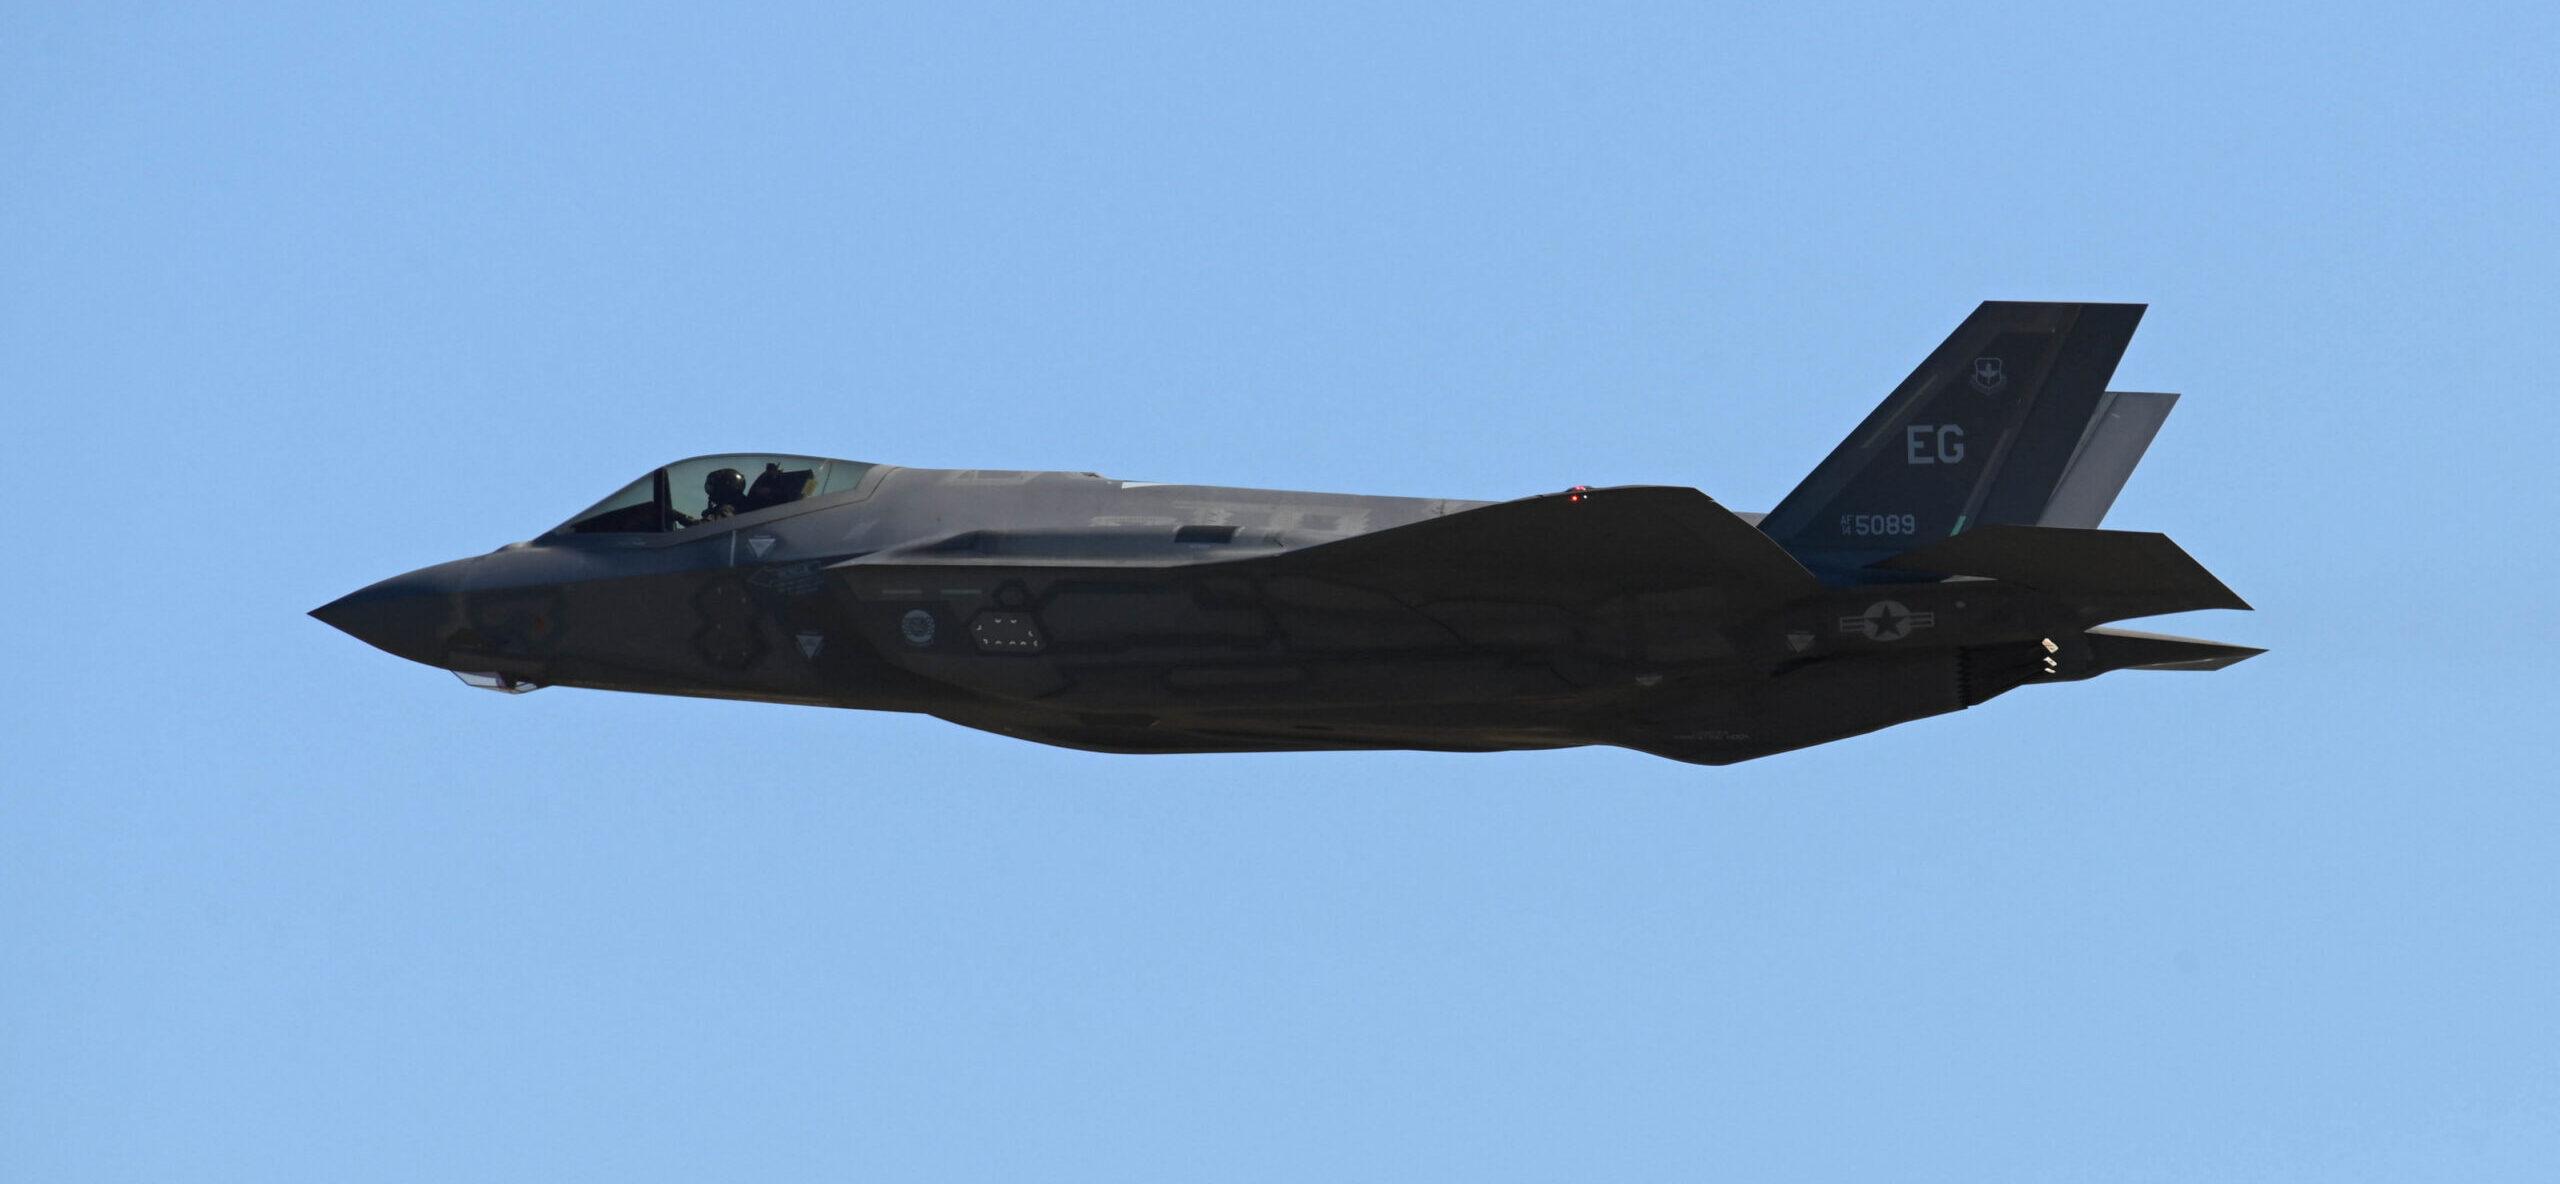 South Carolina Resident Says Missing F-35 Jet Was Flying Too Low, And The Crash Shook His Home